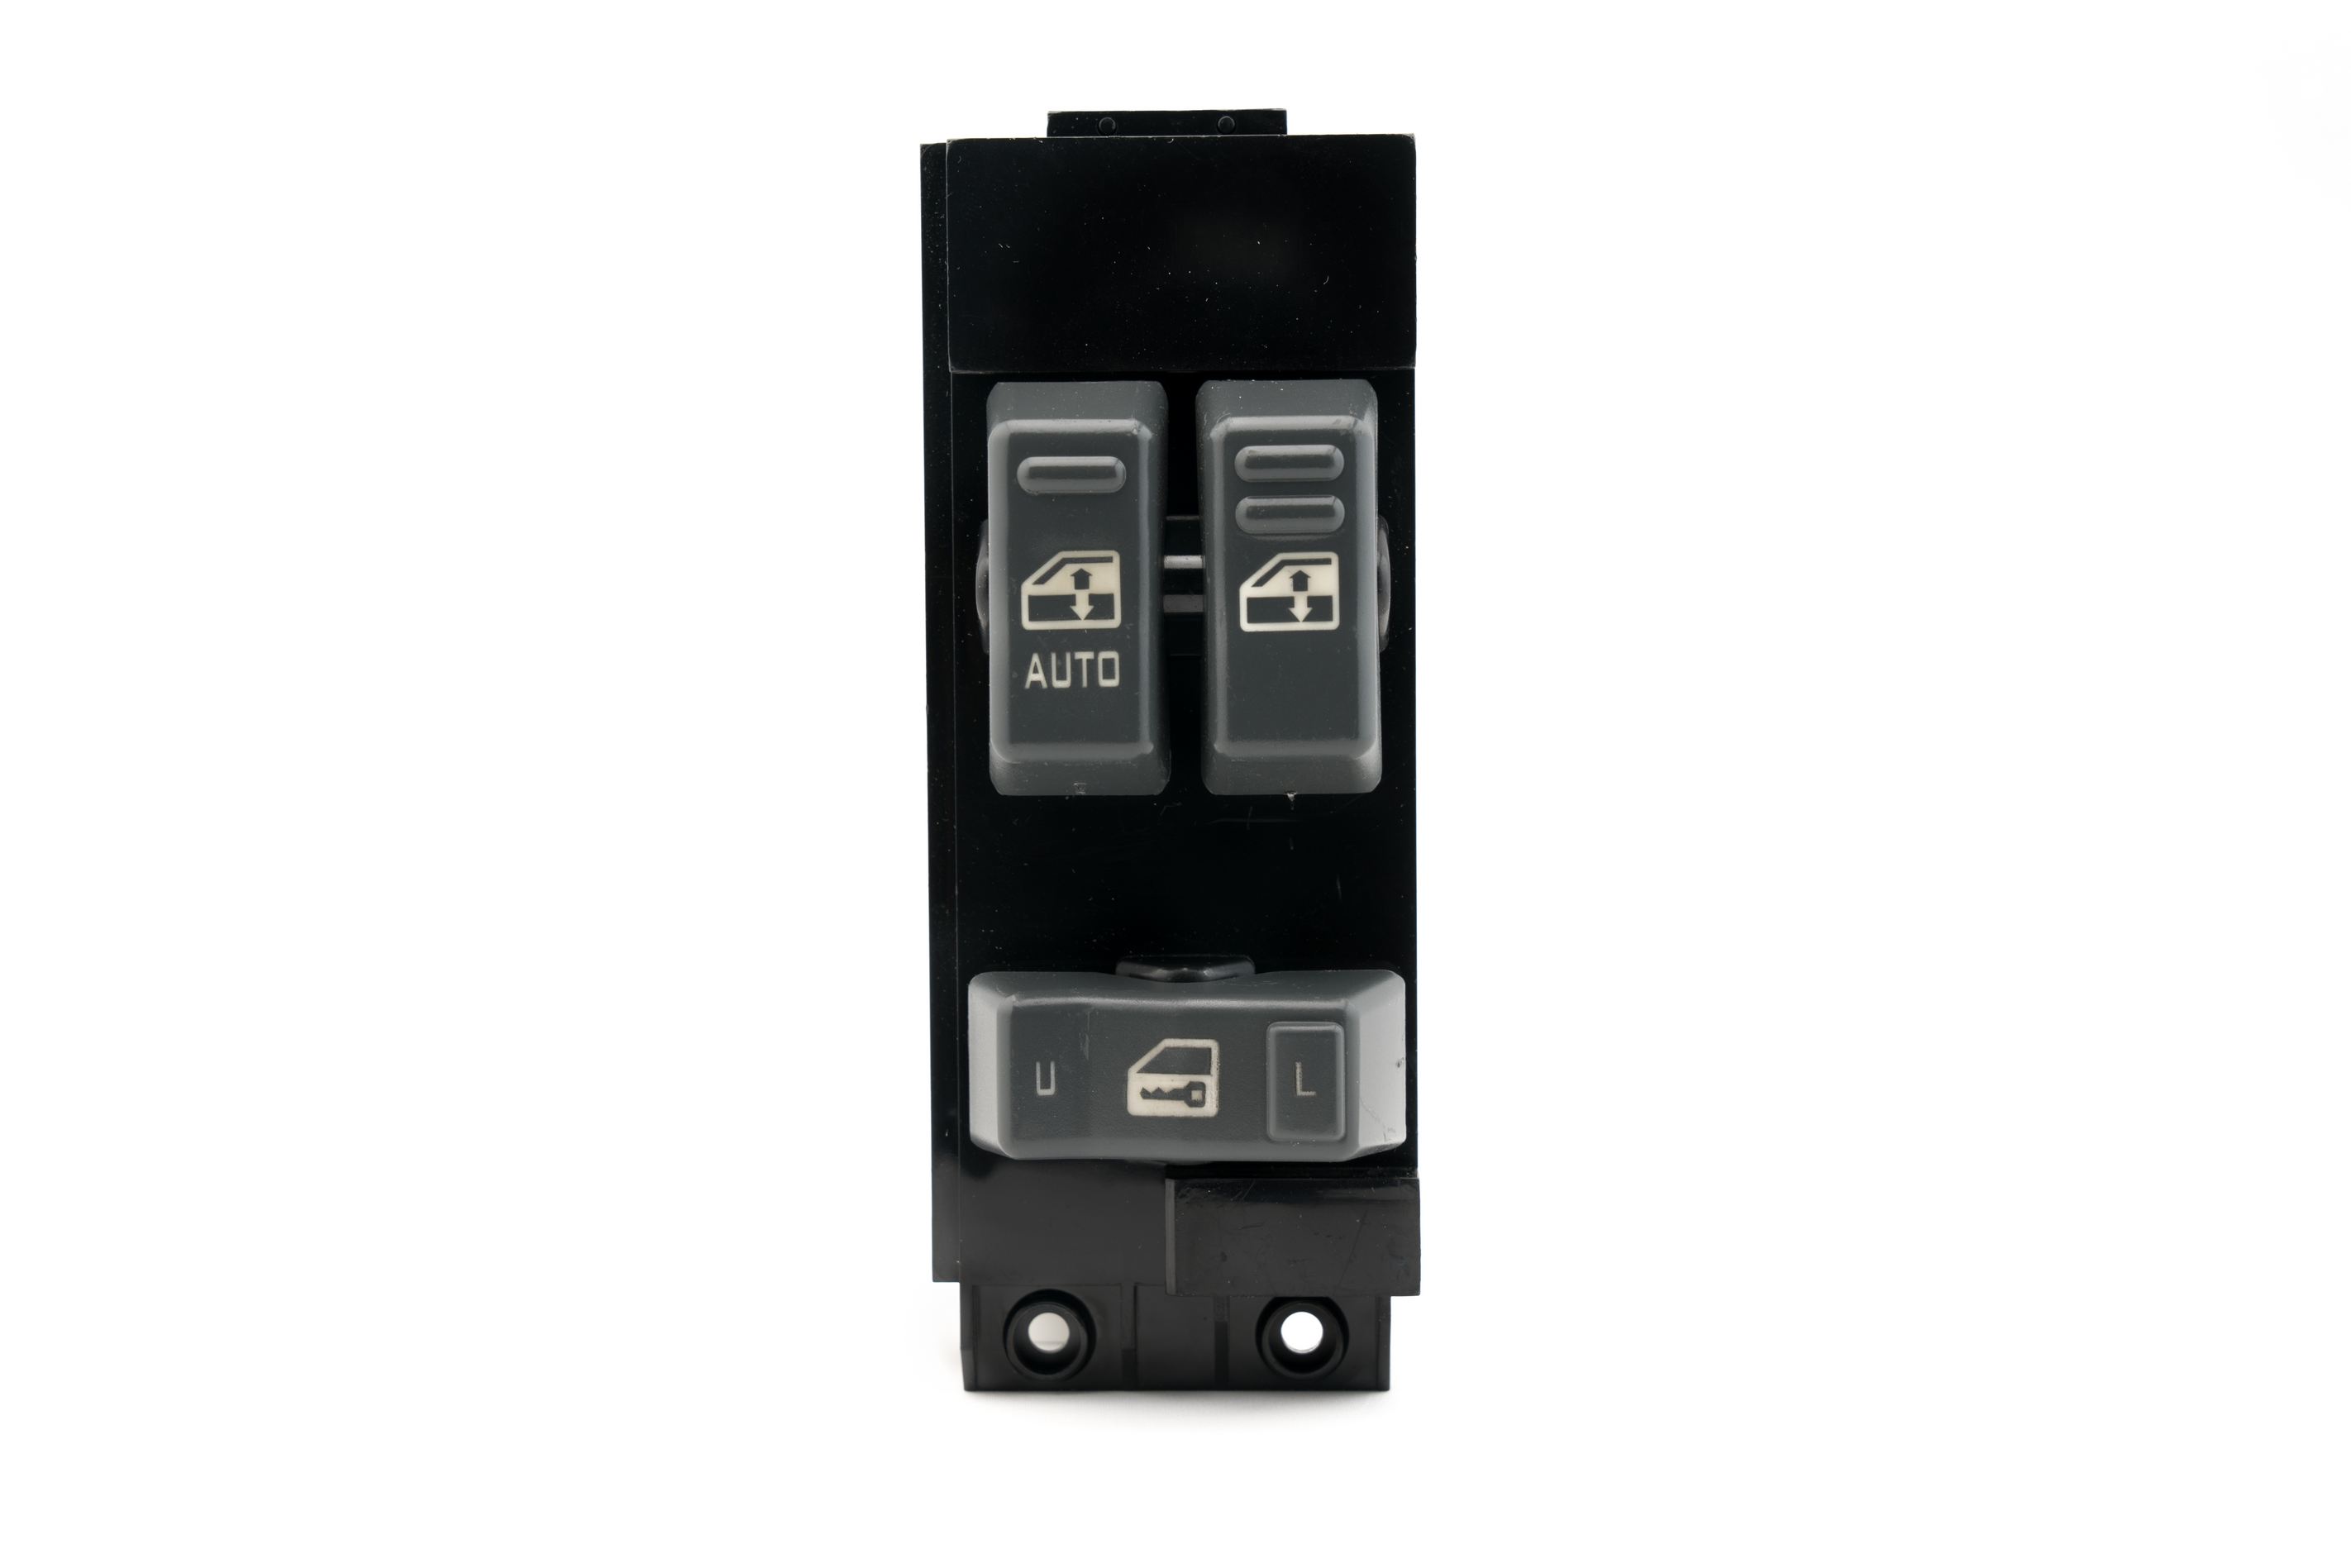 Master Power Window Switch (Black) - Driver Side Door - Chevrolet Silverado, GMC Sierra 1999, 2000, 2001, 2002 - 1500, 2500, 2500 HD, 3500 - Window Switch, Housing for Chevy - Replaces GM # 15047637 Image